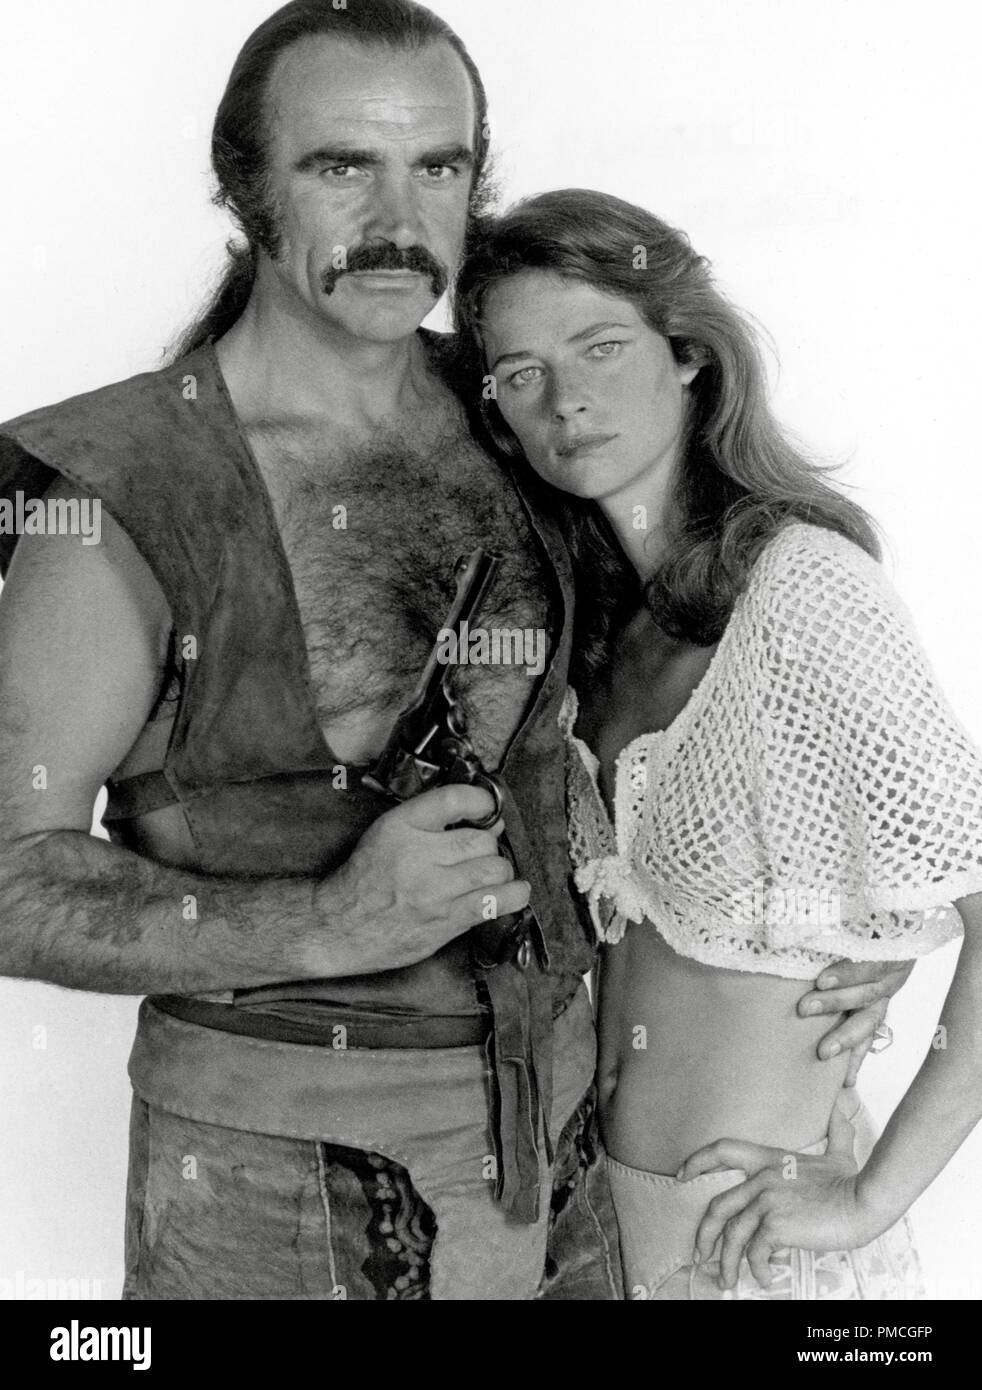 Sean Connery, Charlotte Rampling, 'Zardoz' (1974) 20th Century Fox  File Reference # 33536 852THA  For Editorial Use Only -  All Rights Reserved Stock Photo